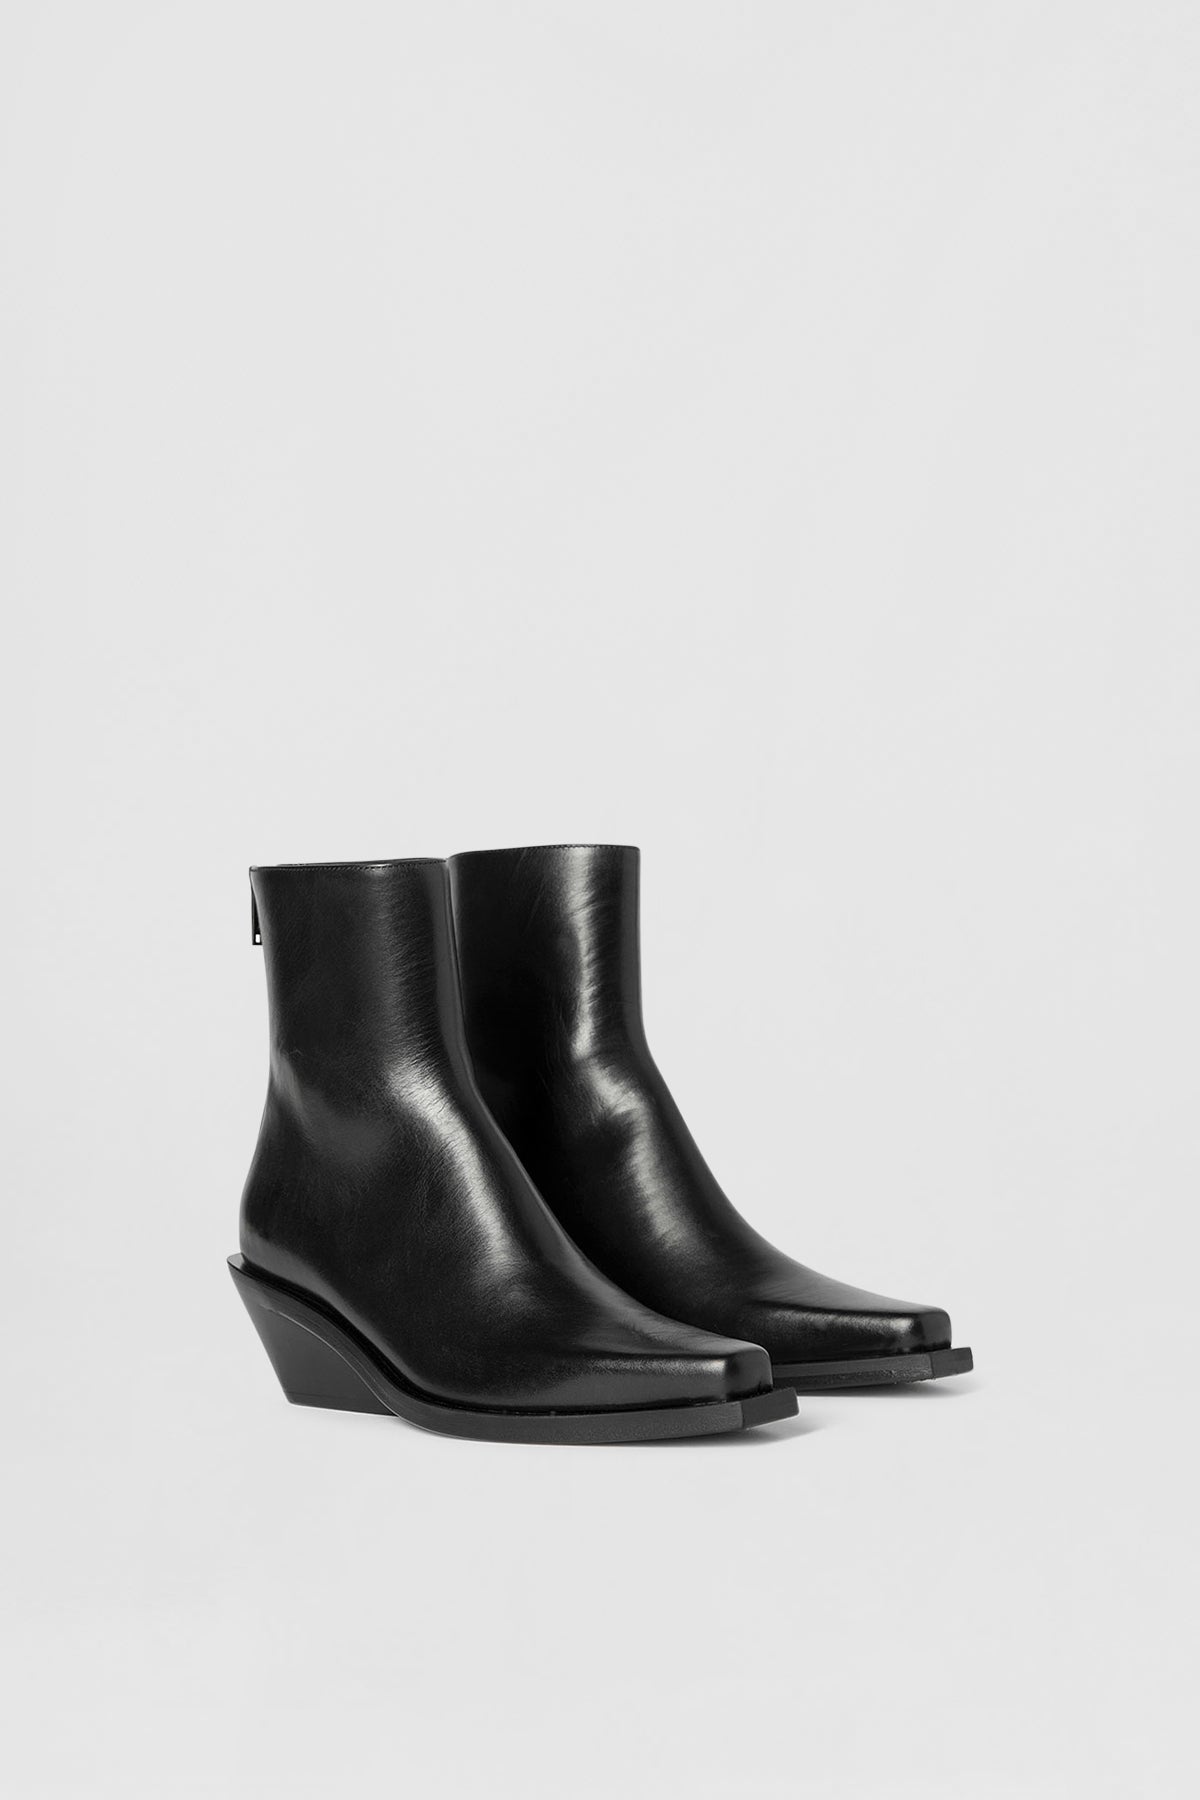 Rumi Cowboy Ankle Boots